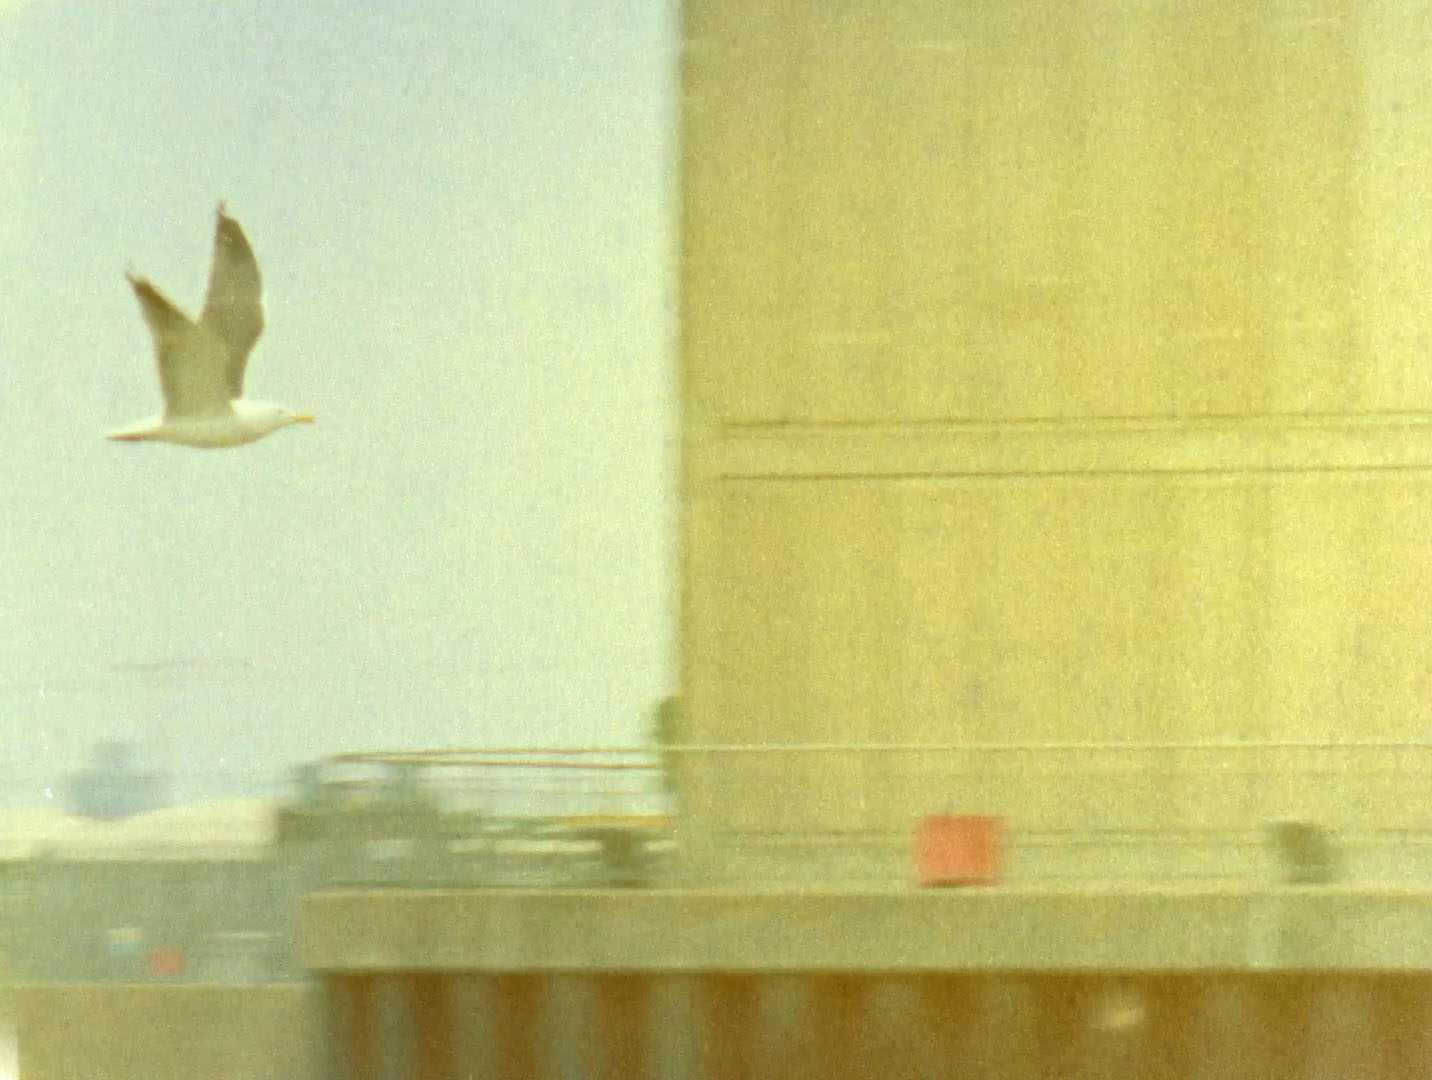 Still from Flood Barrier by Catherine Yass Courtesy of the artist